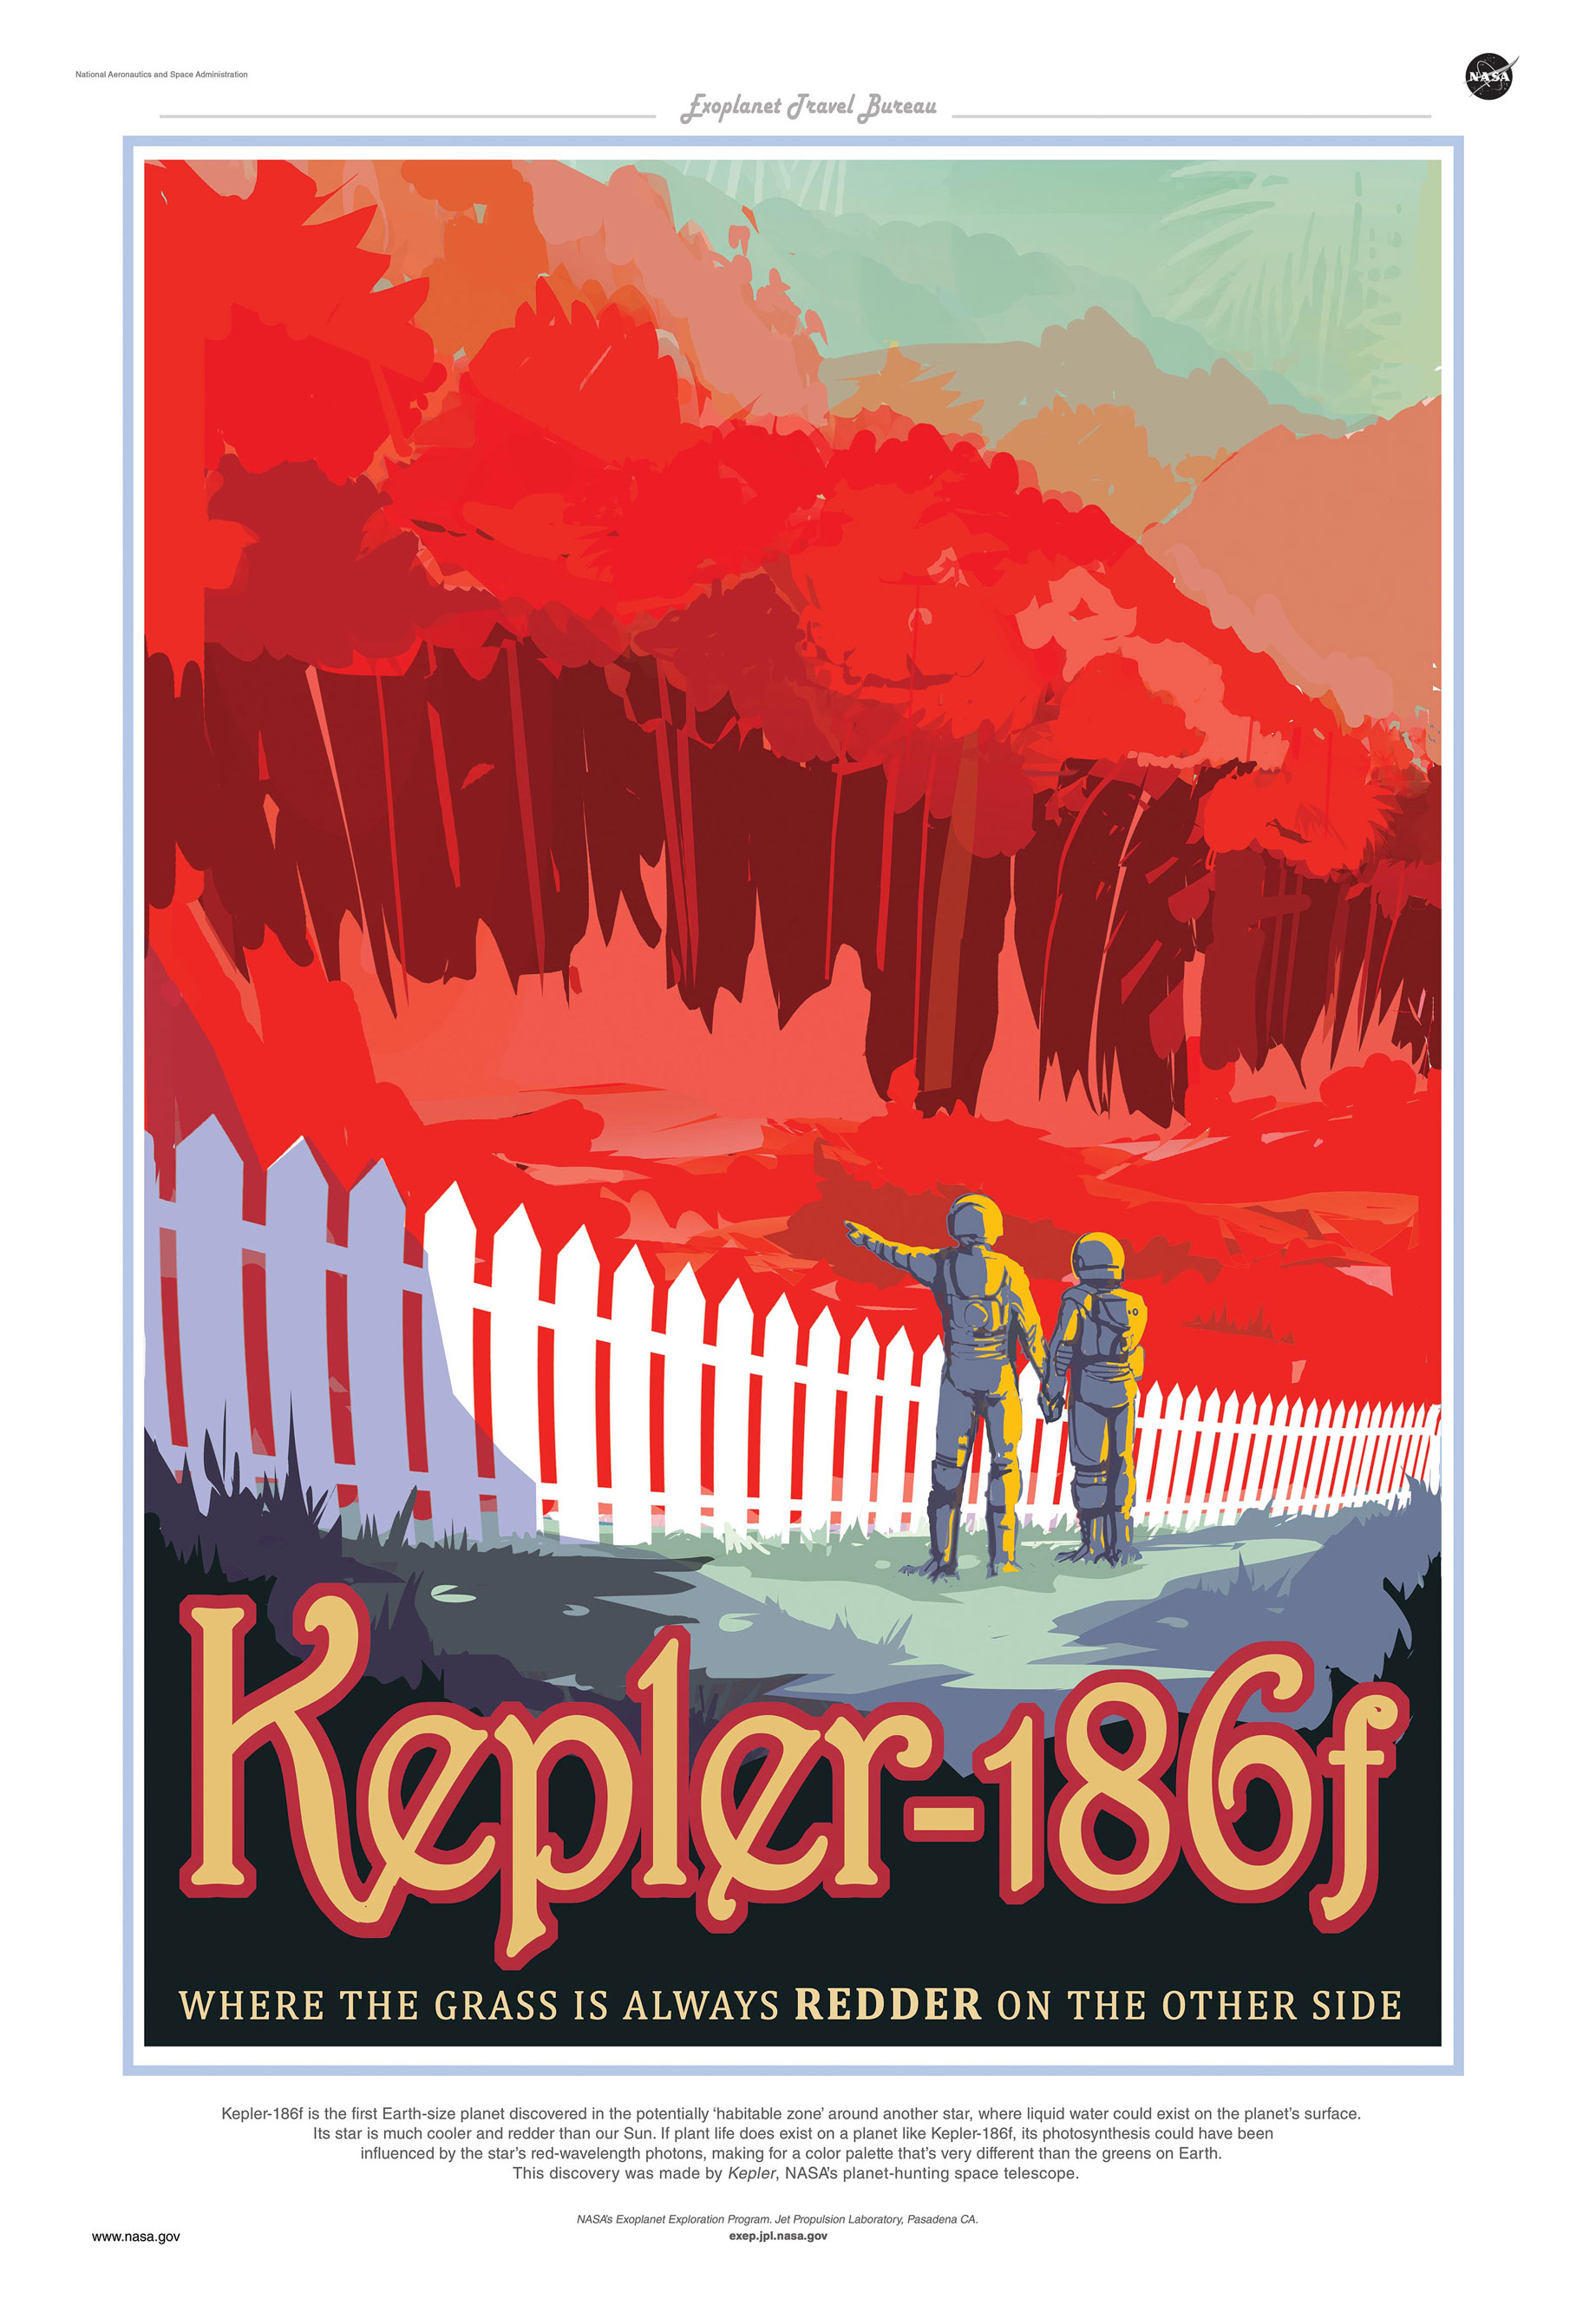 Kepler-186f - Where the Grass is Always Redder on the Other Side
                              
                              Kepler-186f is the first Earth-size planet discovered in the potentially 'habitable zone' around another star, where liquid water could exist on the planet's surface. Its star is much cooler and redder than our Sun. If plant life does exist on a planet like Kepler-186f, its photosynthesis could have been influenced by the star's red-wavelength photons, making for a color palette that's very different than the greens on Earth. This discovery was made by Kepler, NASA's planet hunting telescope.